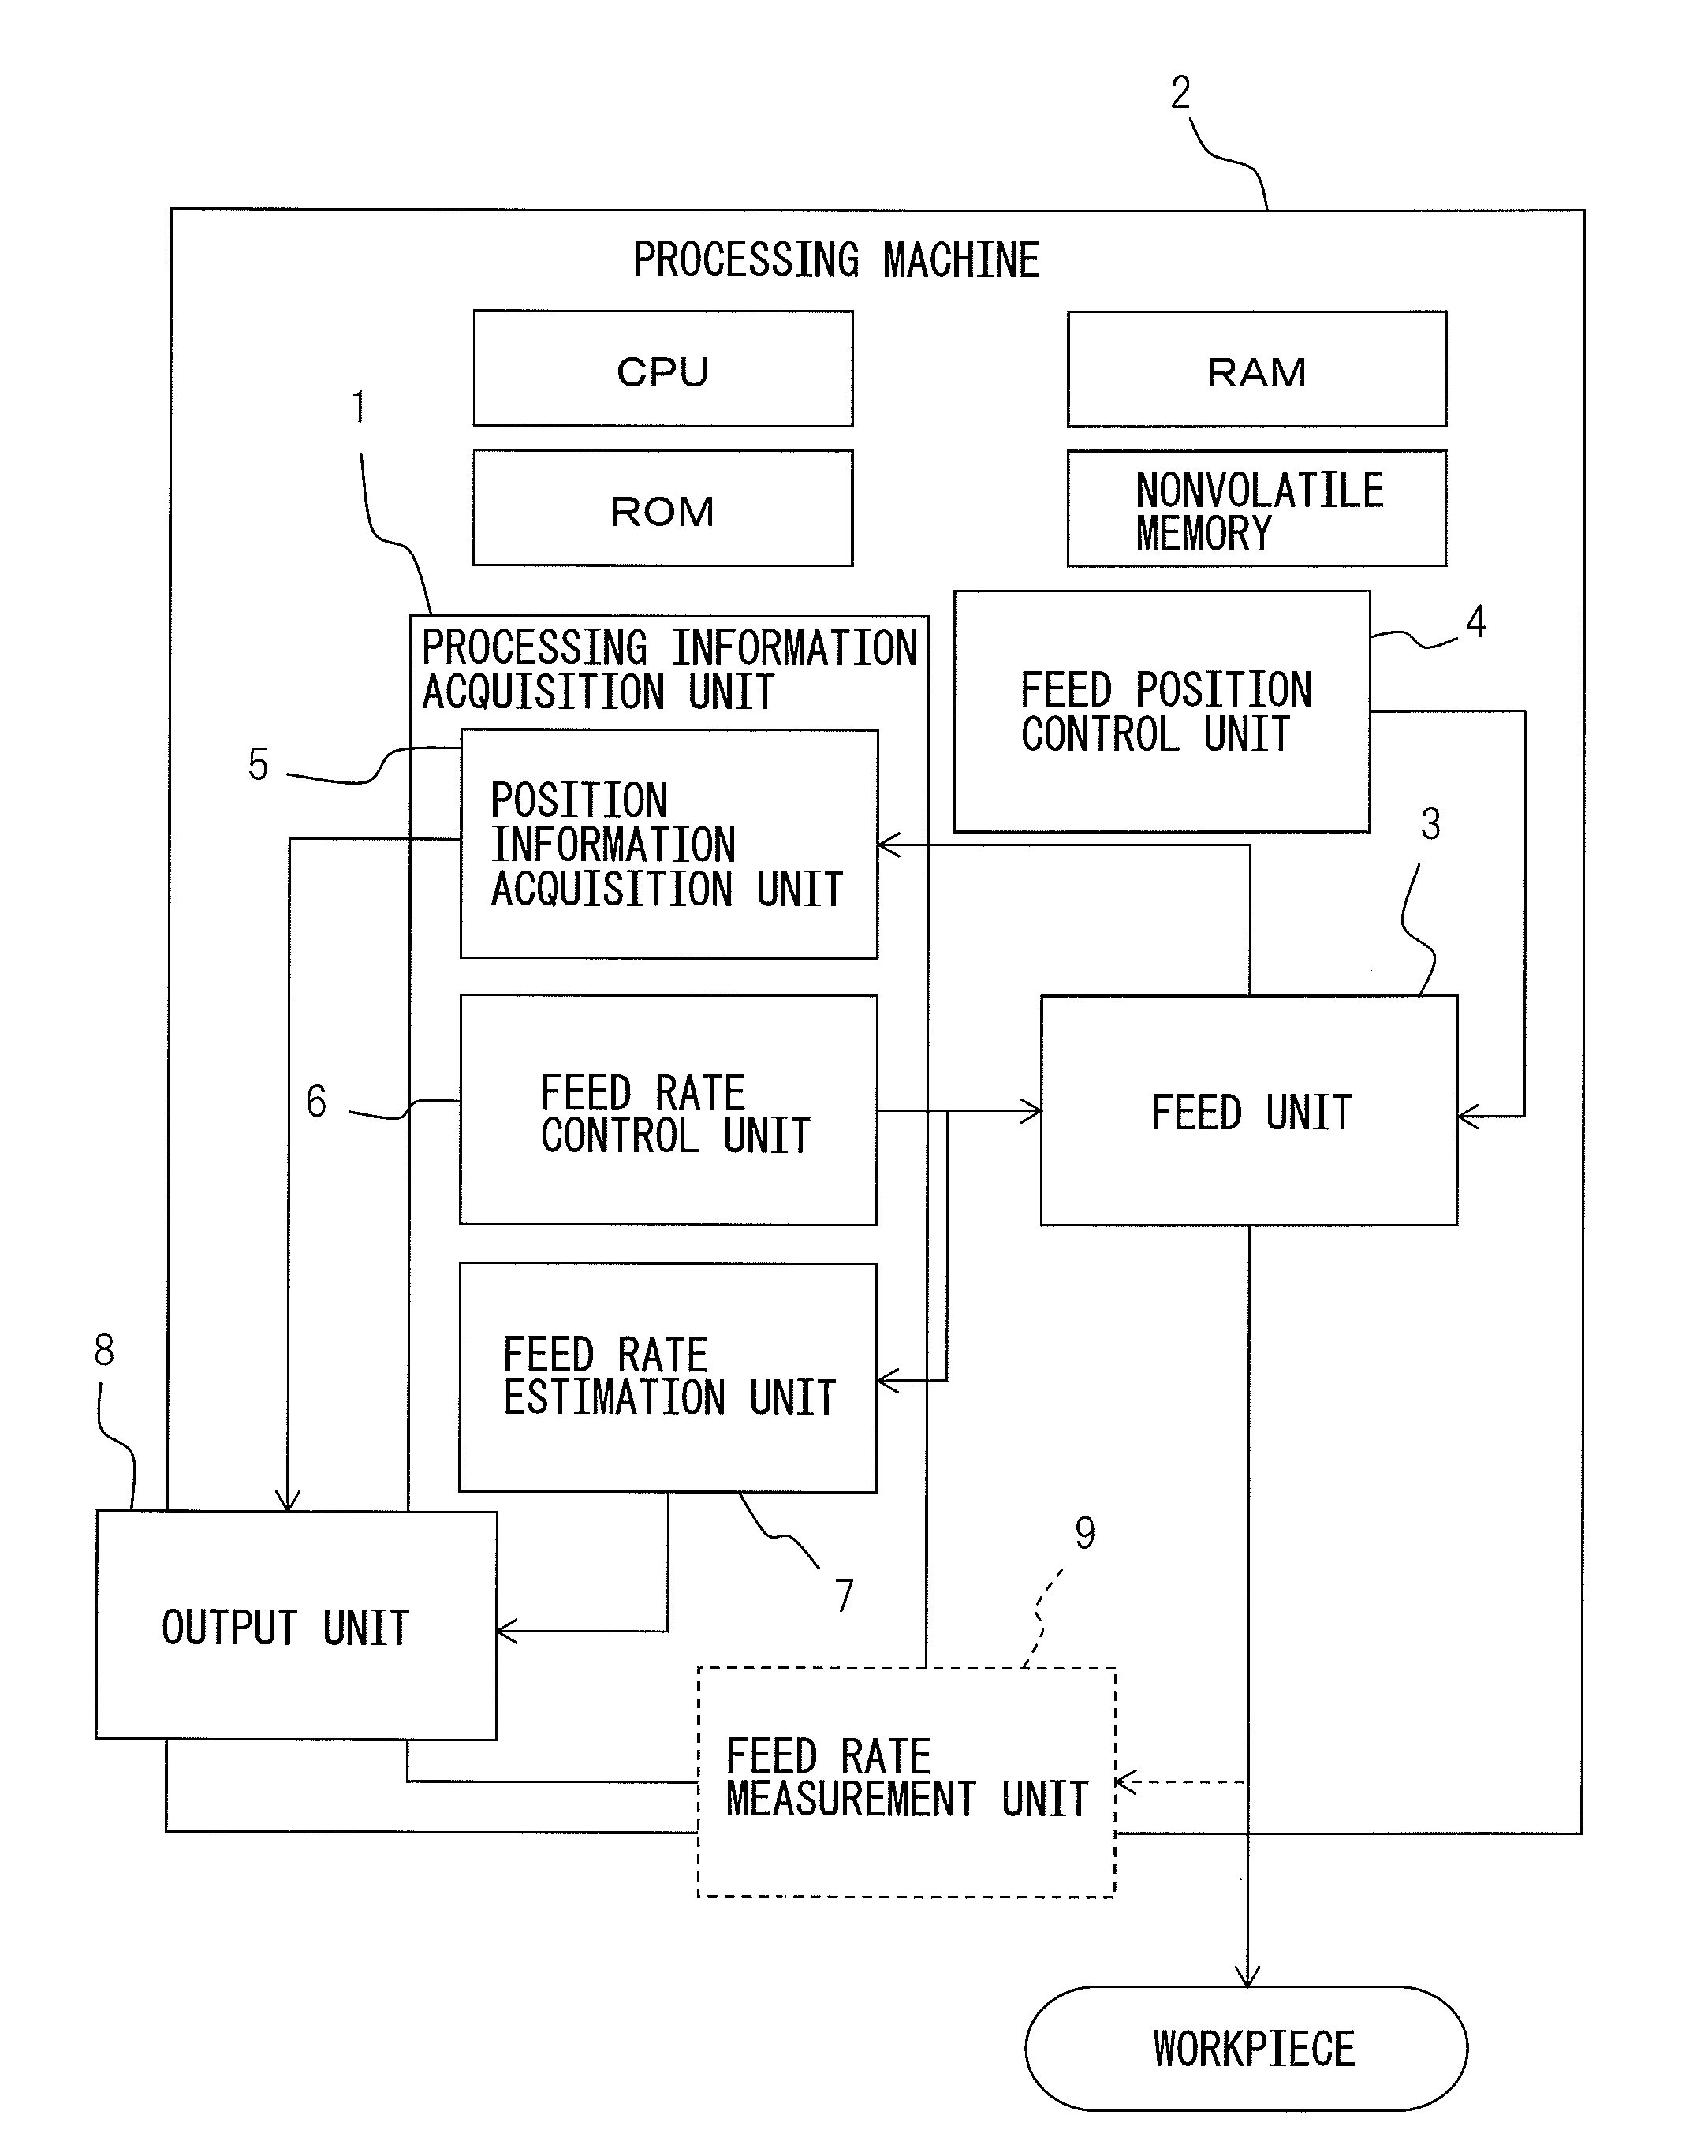 Processing information acquisition system in processing machine supplying processing point with energy or material